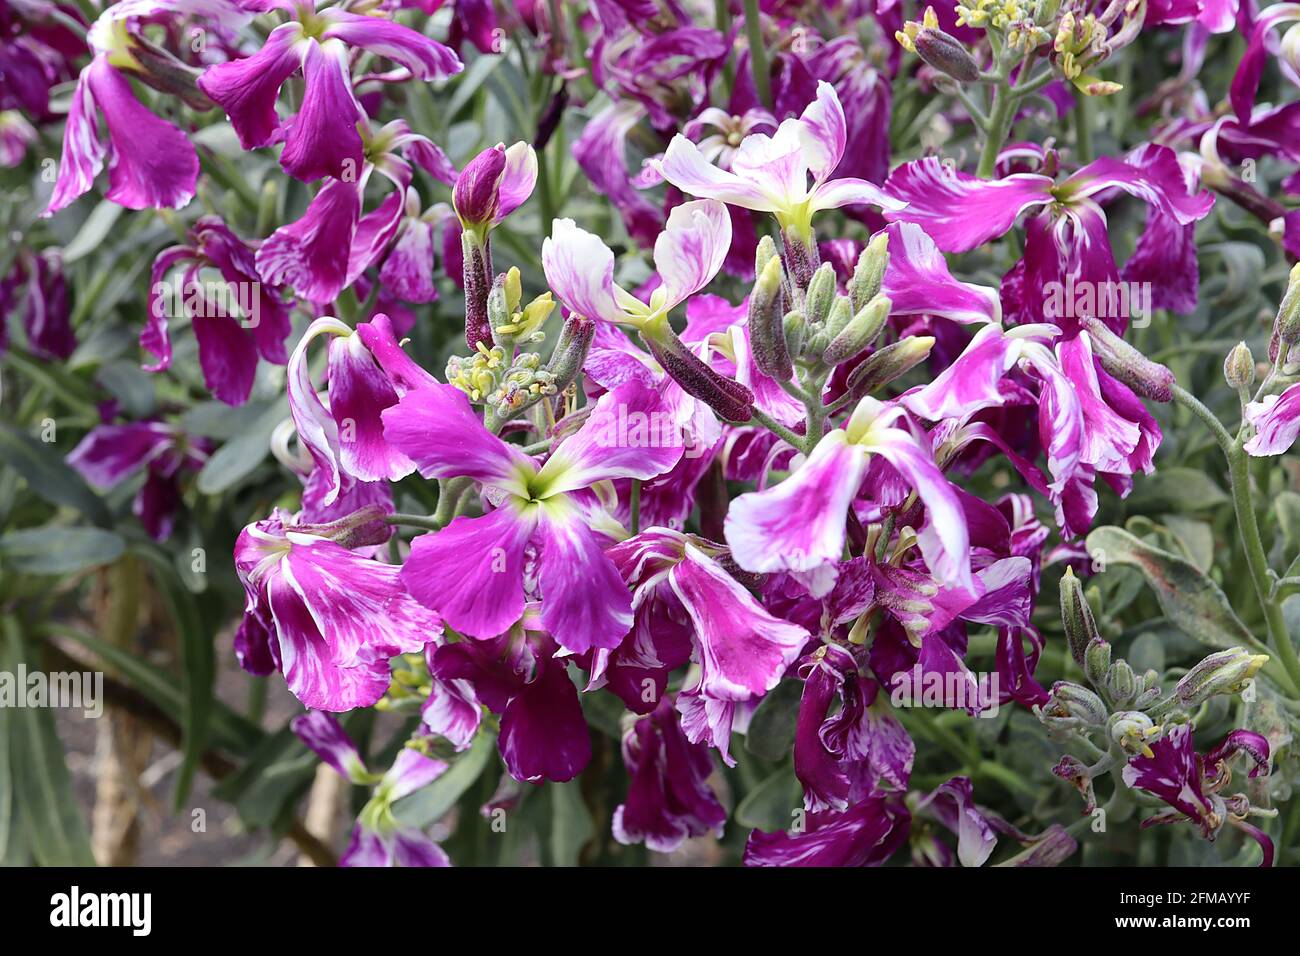 Matthiola arborescens Brompton stock – purple and white marbled flowers,  May, England, UK Stock Photo